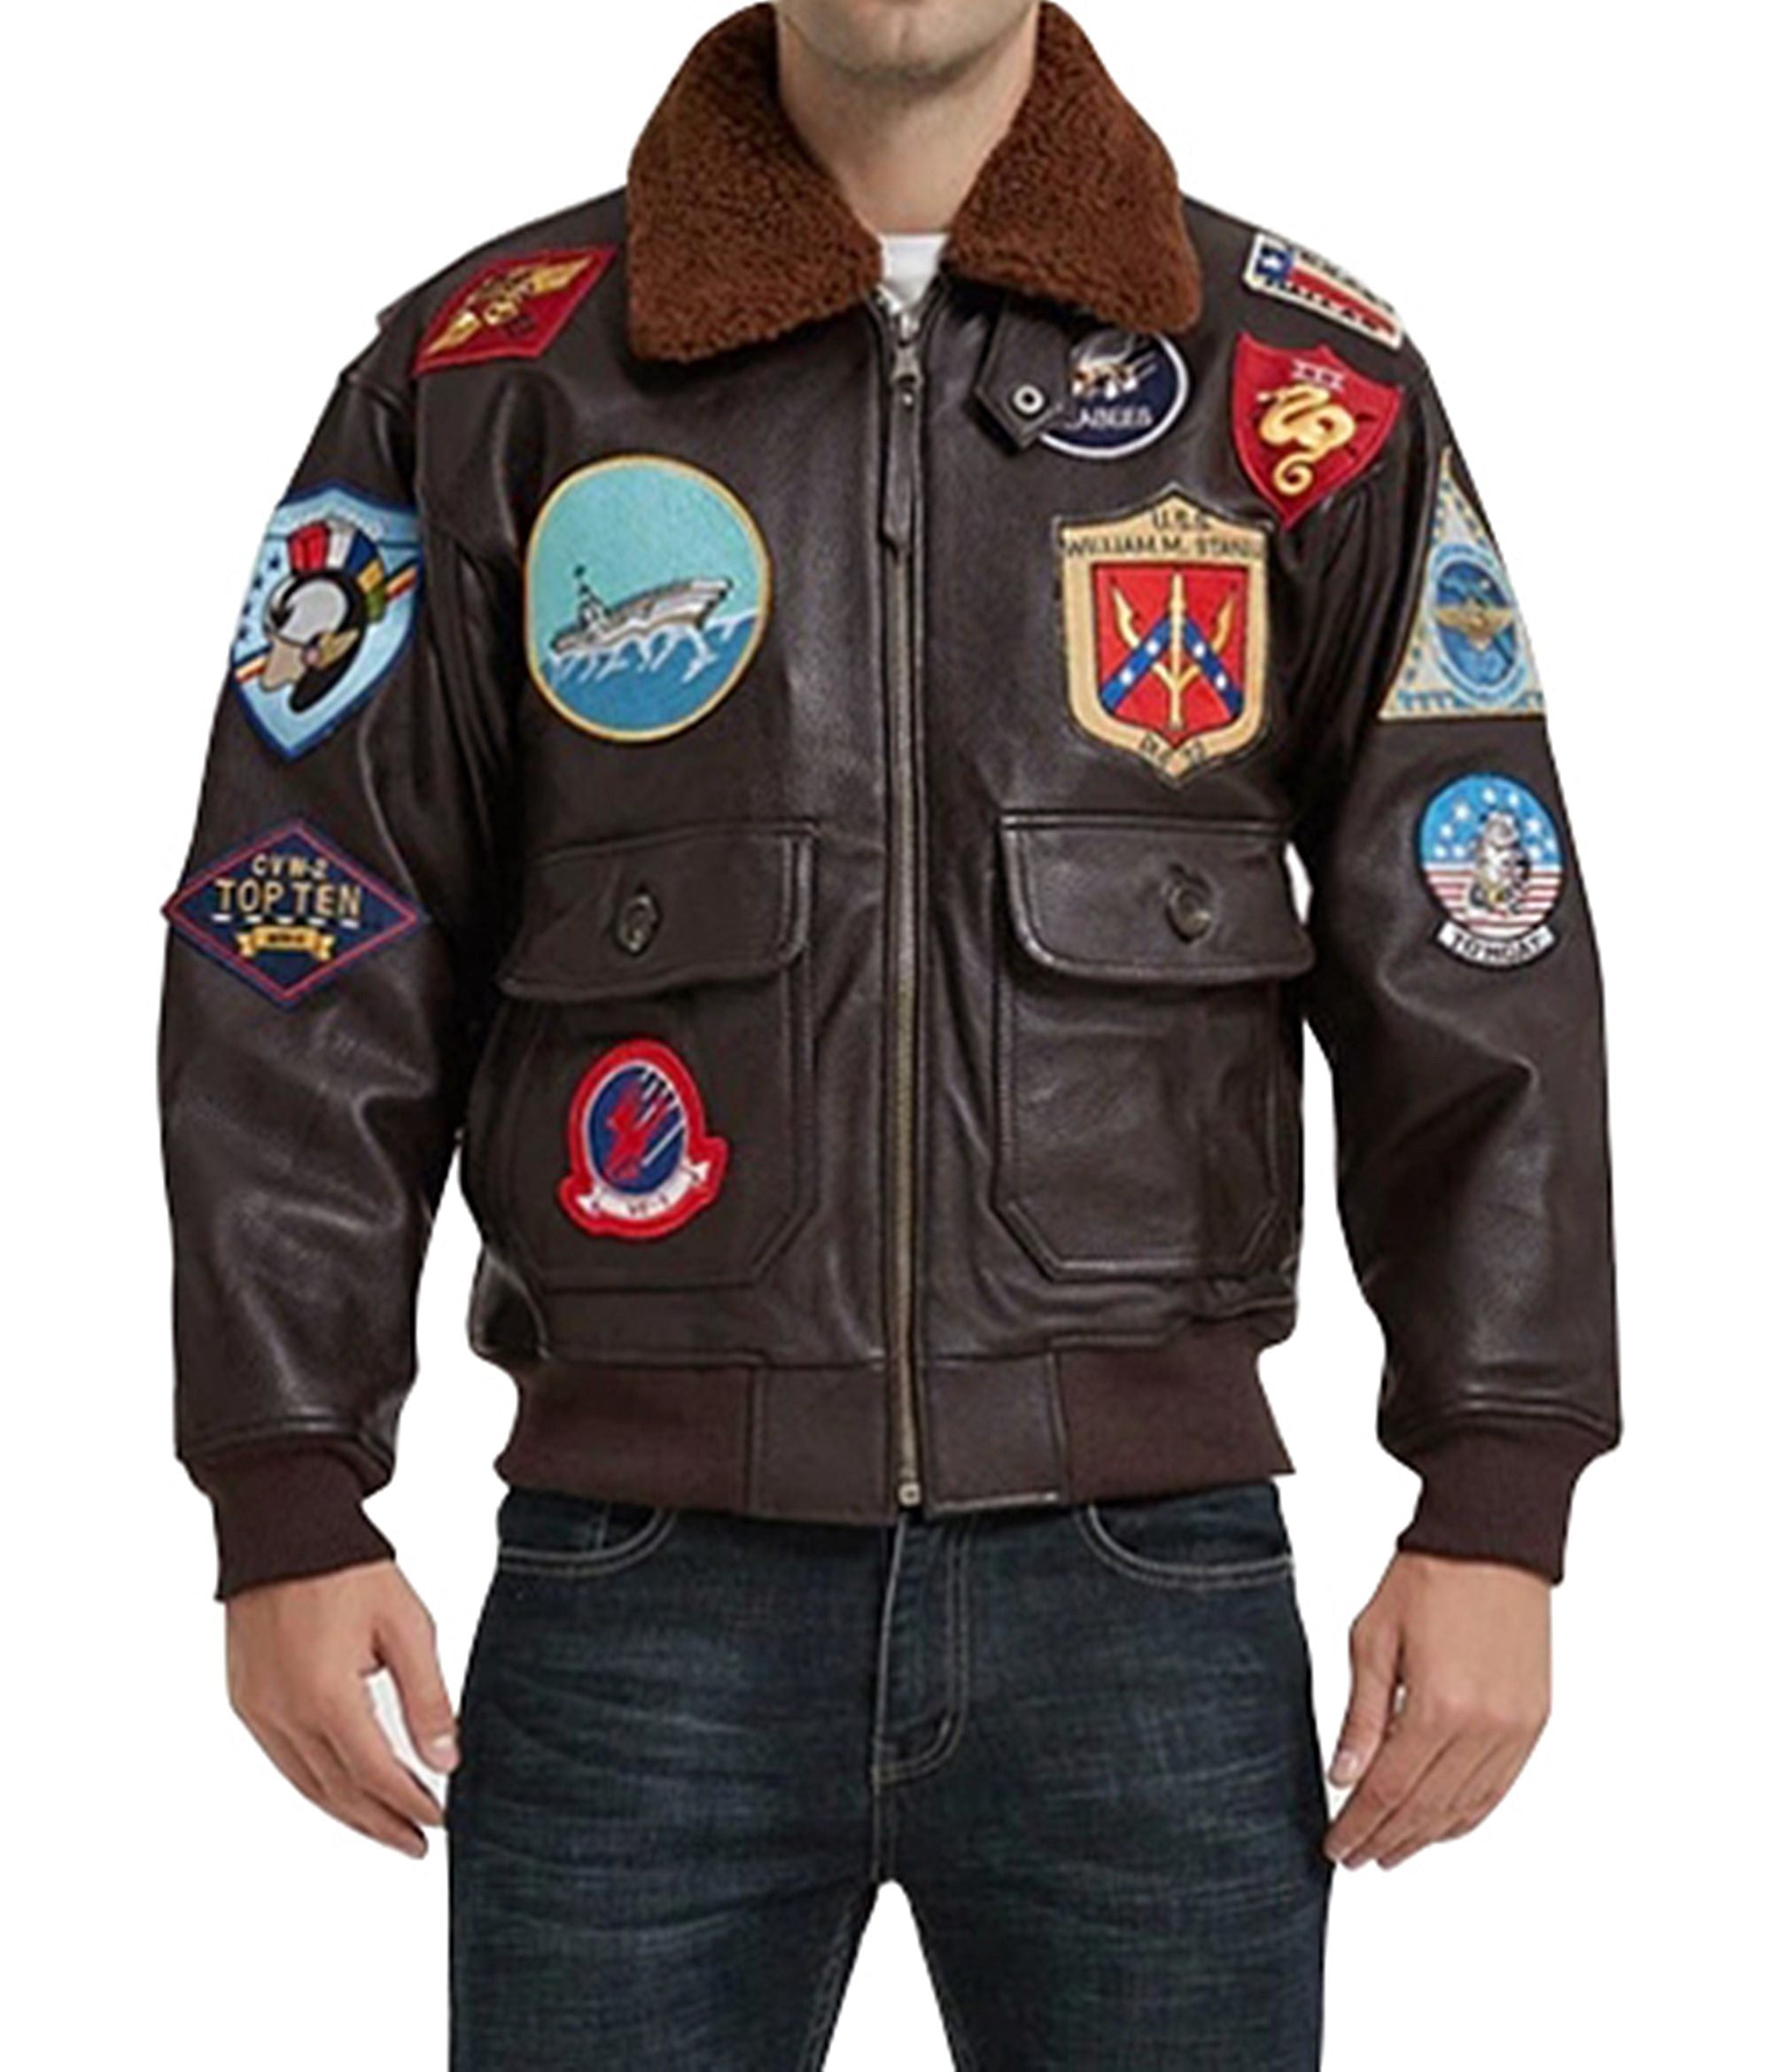 Maverick Tom Cruise Top Gun Leather Jacket with Patches - Jackets